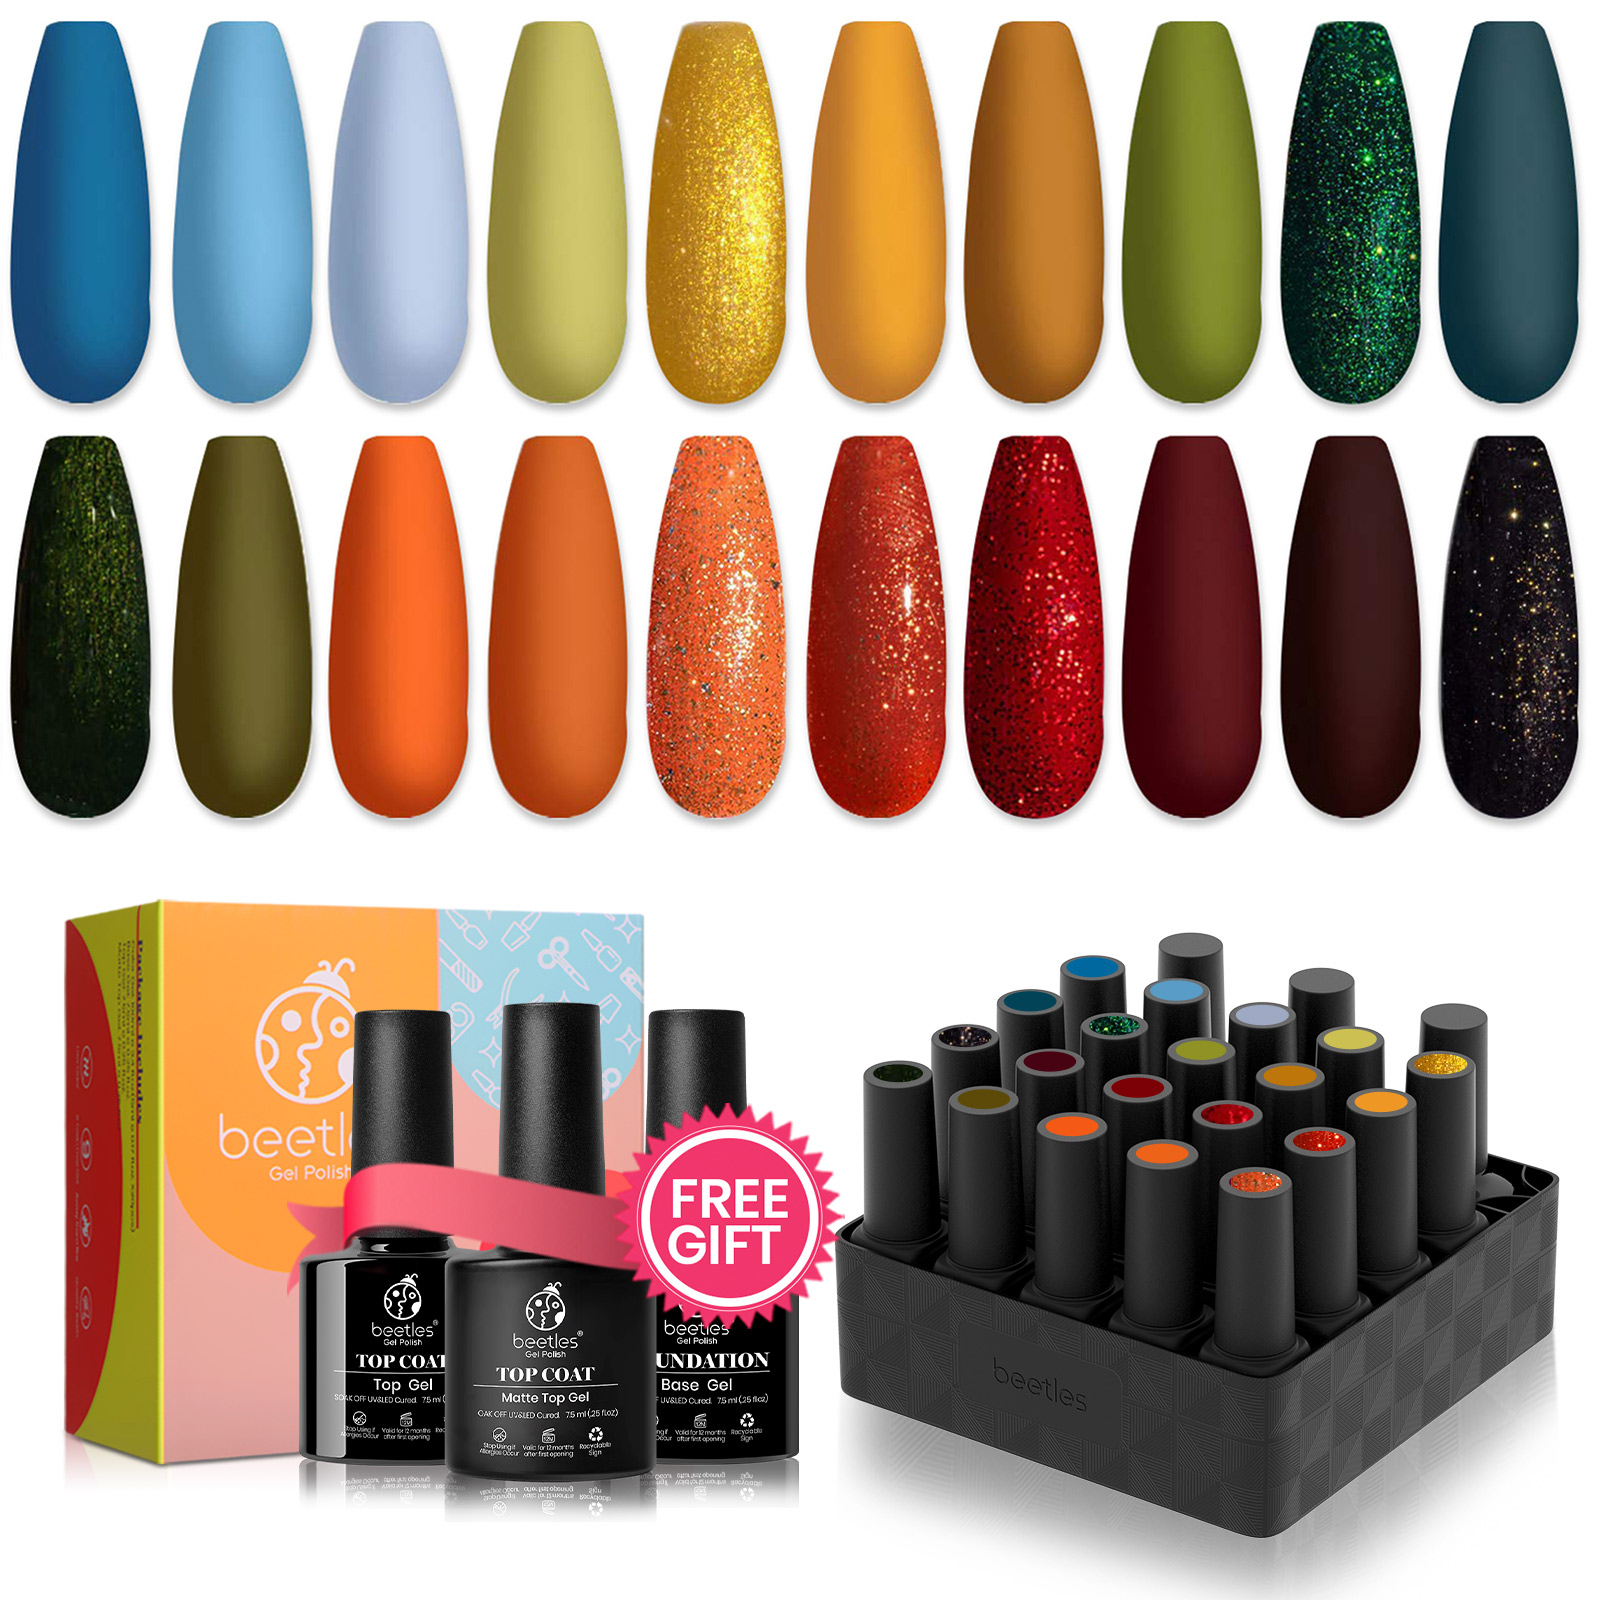 Beetles Nail Glue Kit: All-in-One Solution for Perfect Glue-On Nails